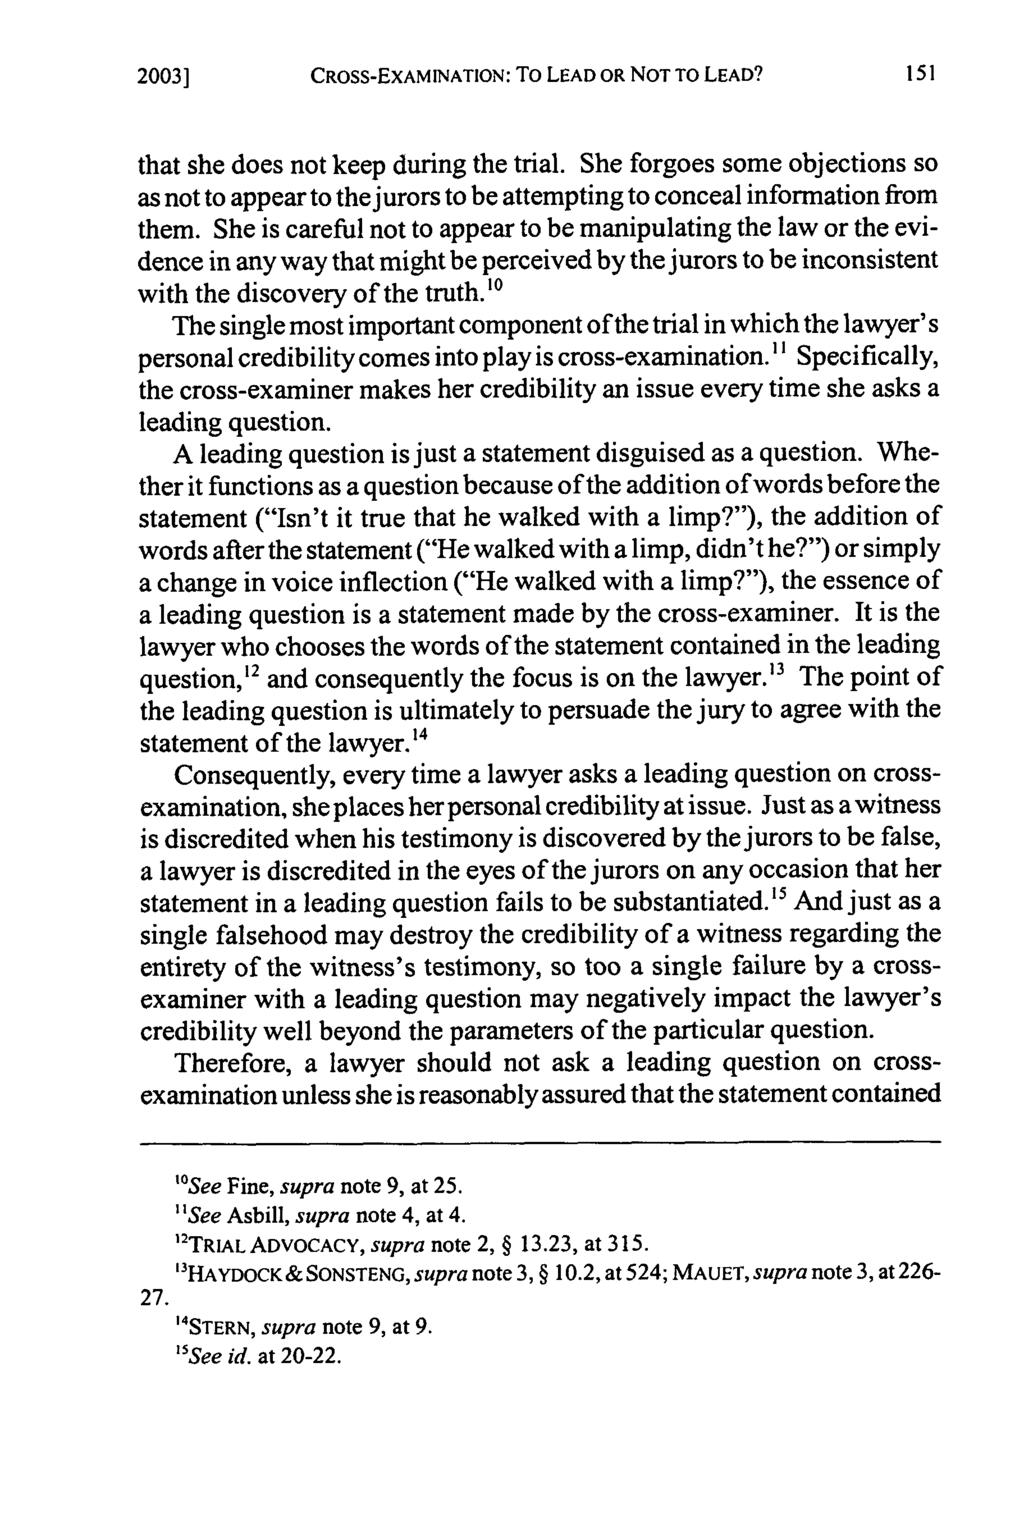 2003] CROSS-EXAMINATION: To LEAD OR NOT TO LEAD? that she does not keep during the trial.